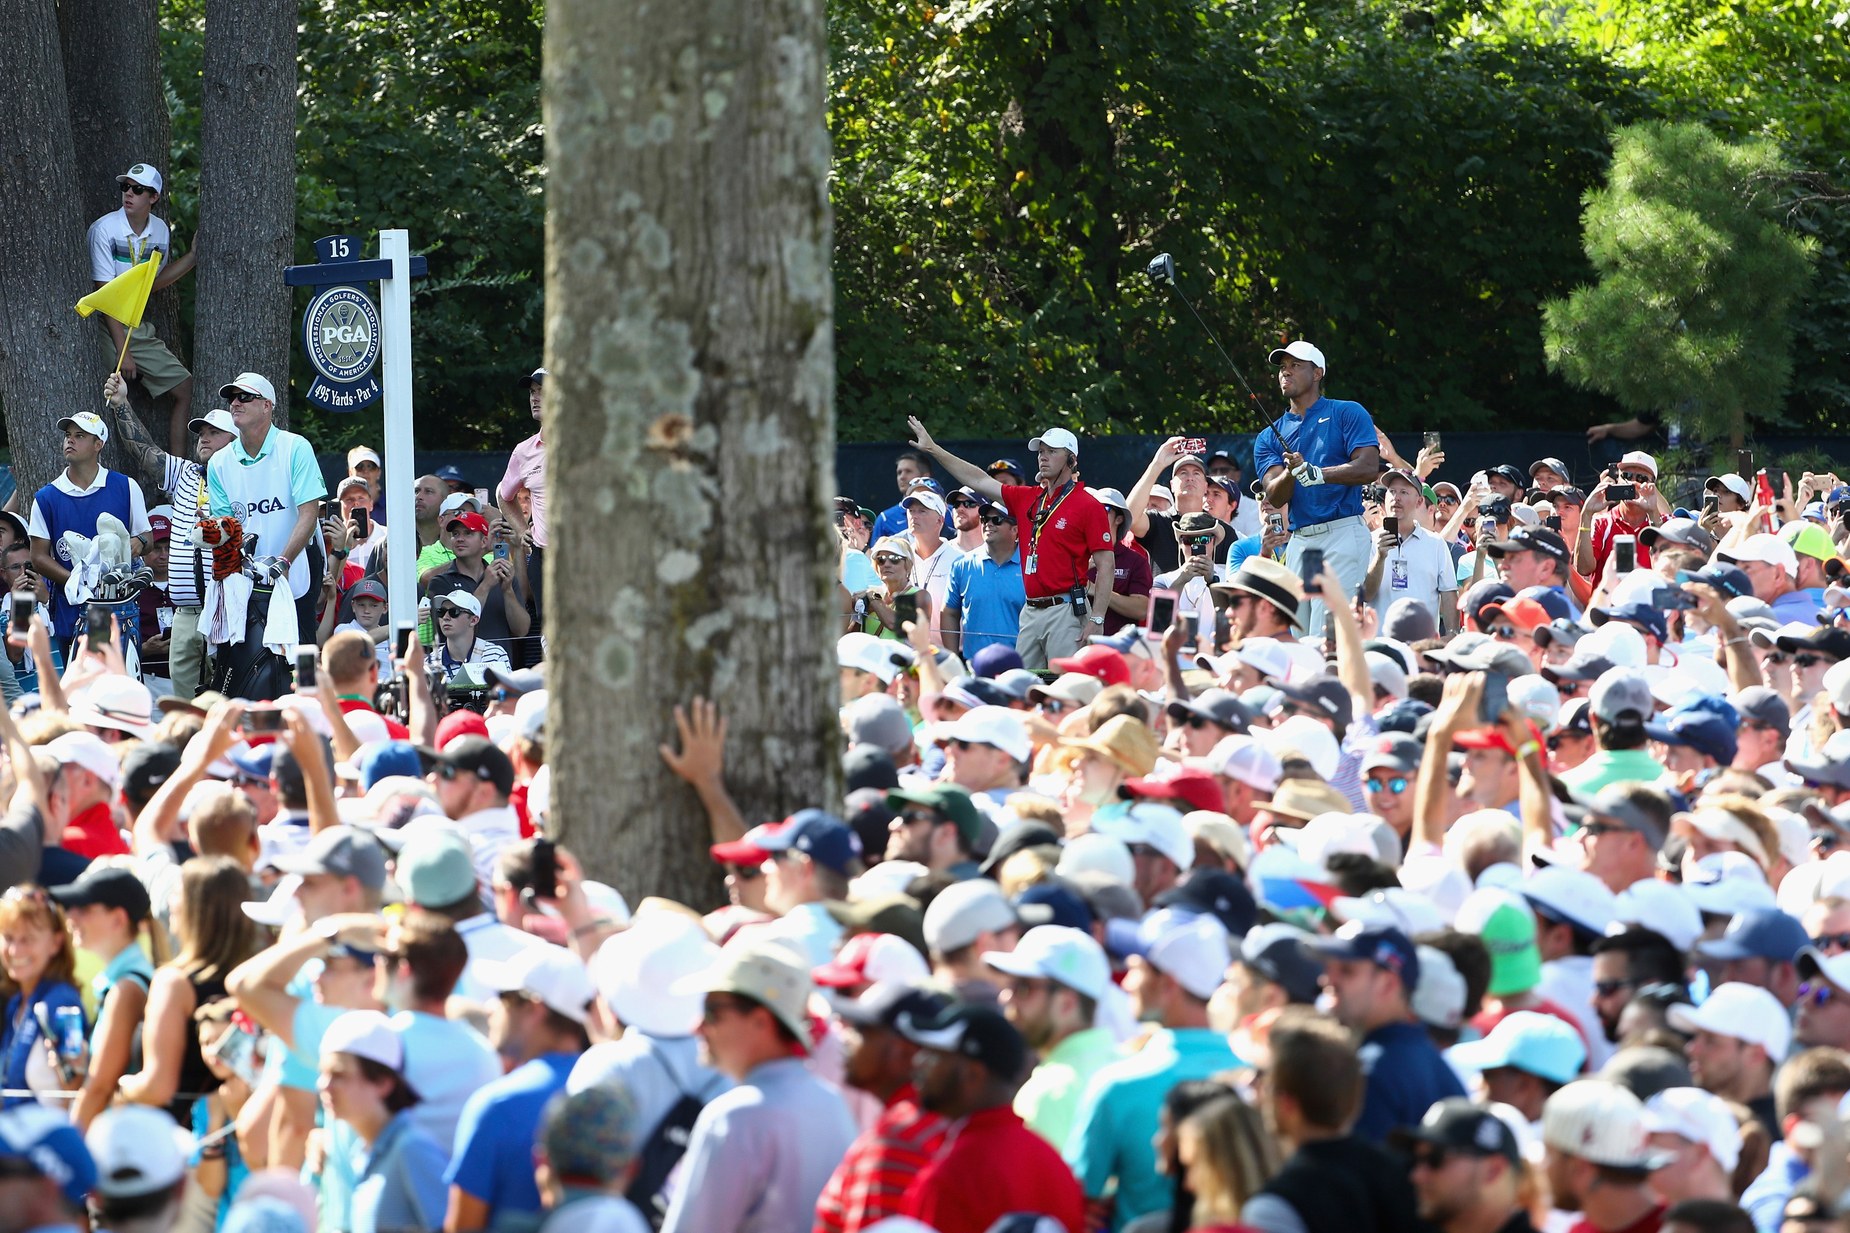 From Rahm to Rickie to, yes, Tiger, there’s a crowd chasing Brooks Koepka at Bellerive